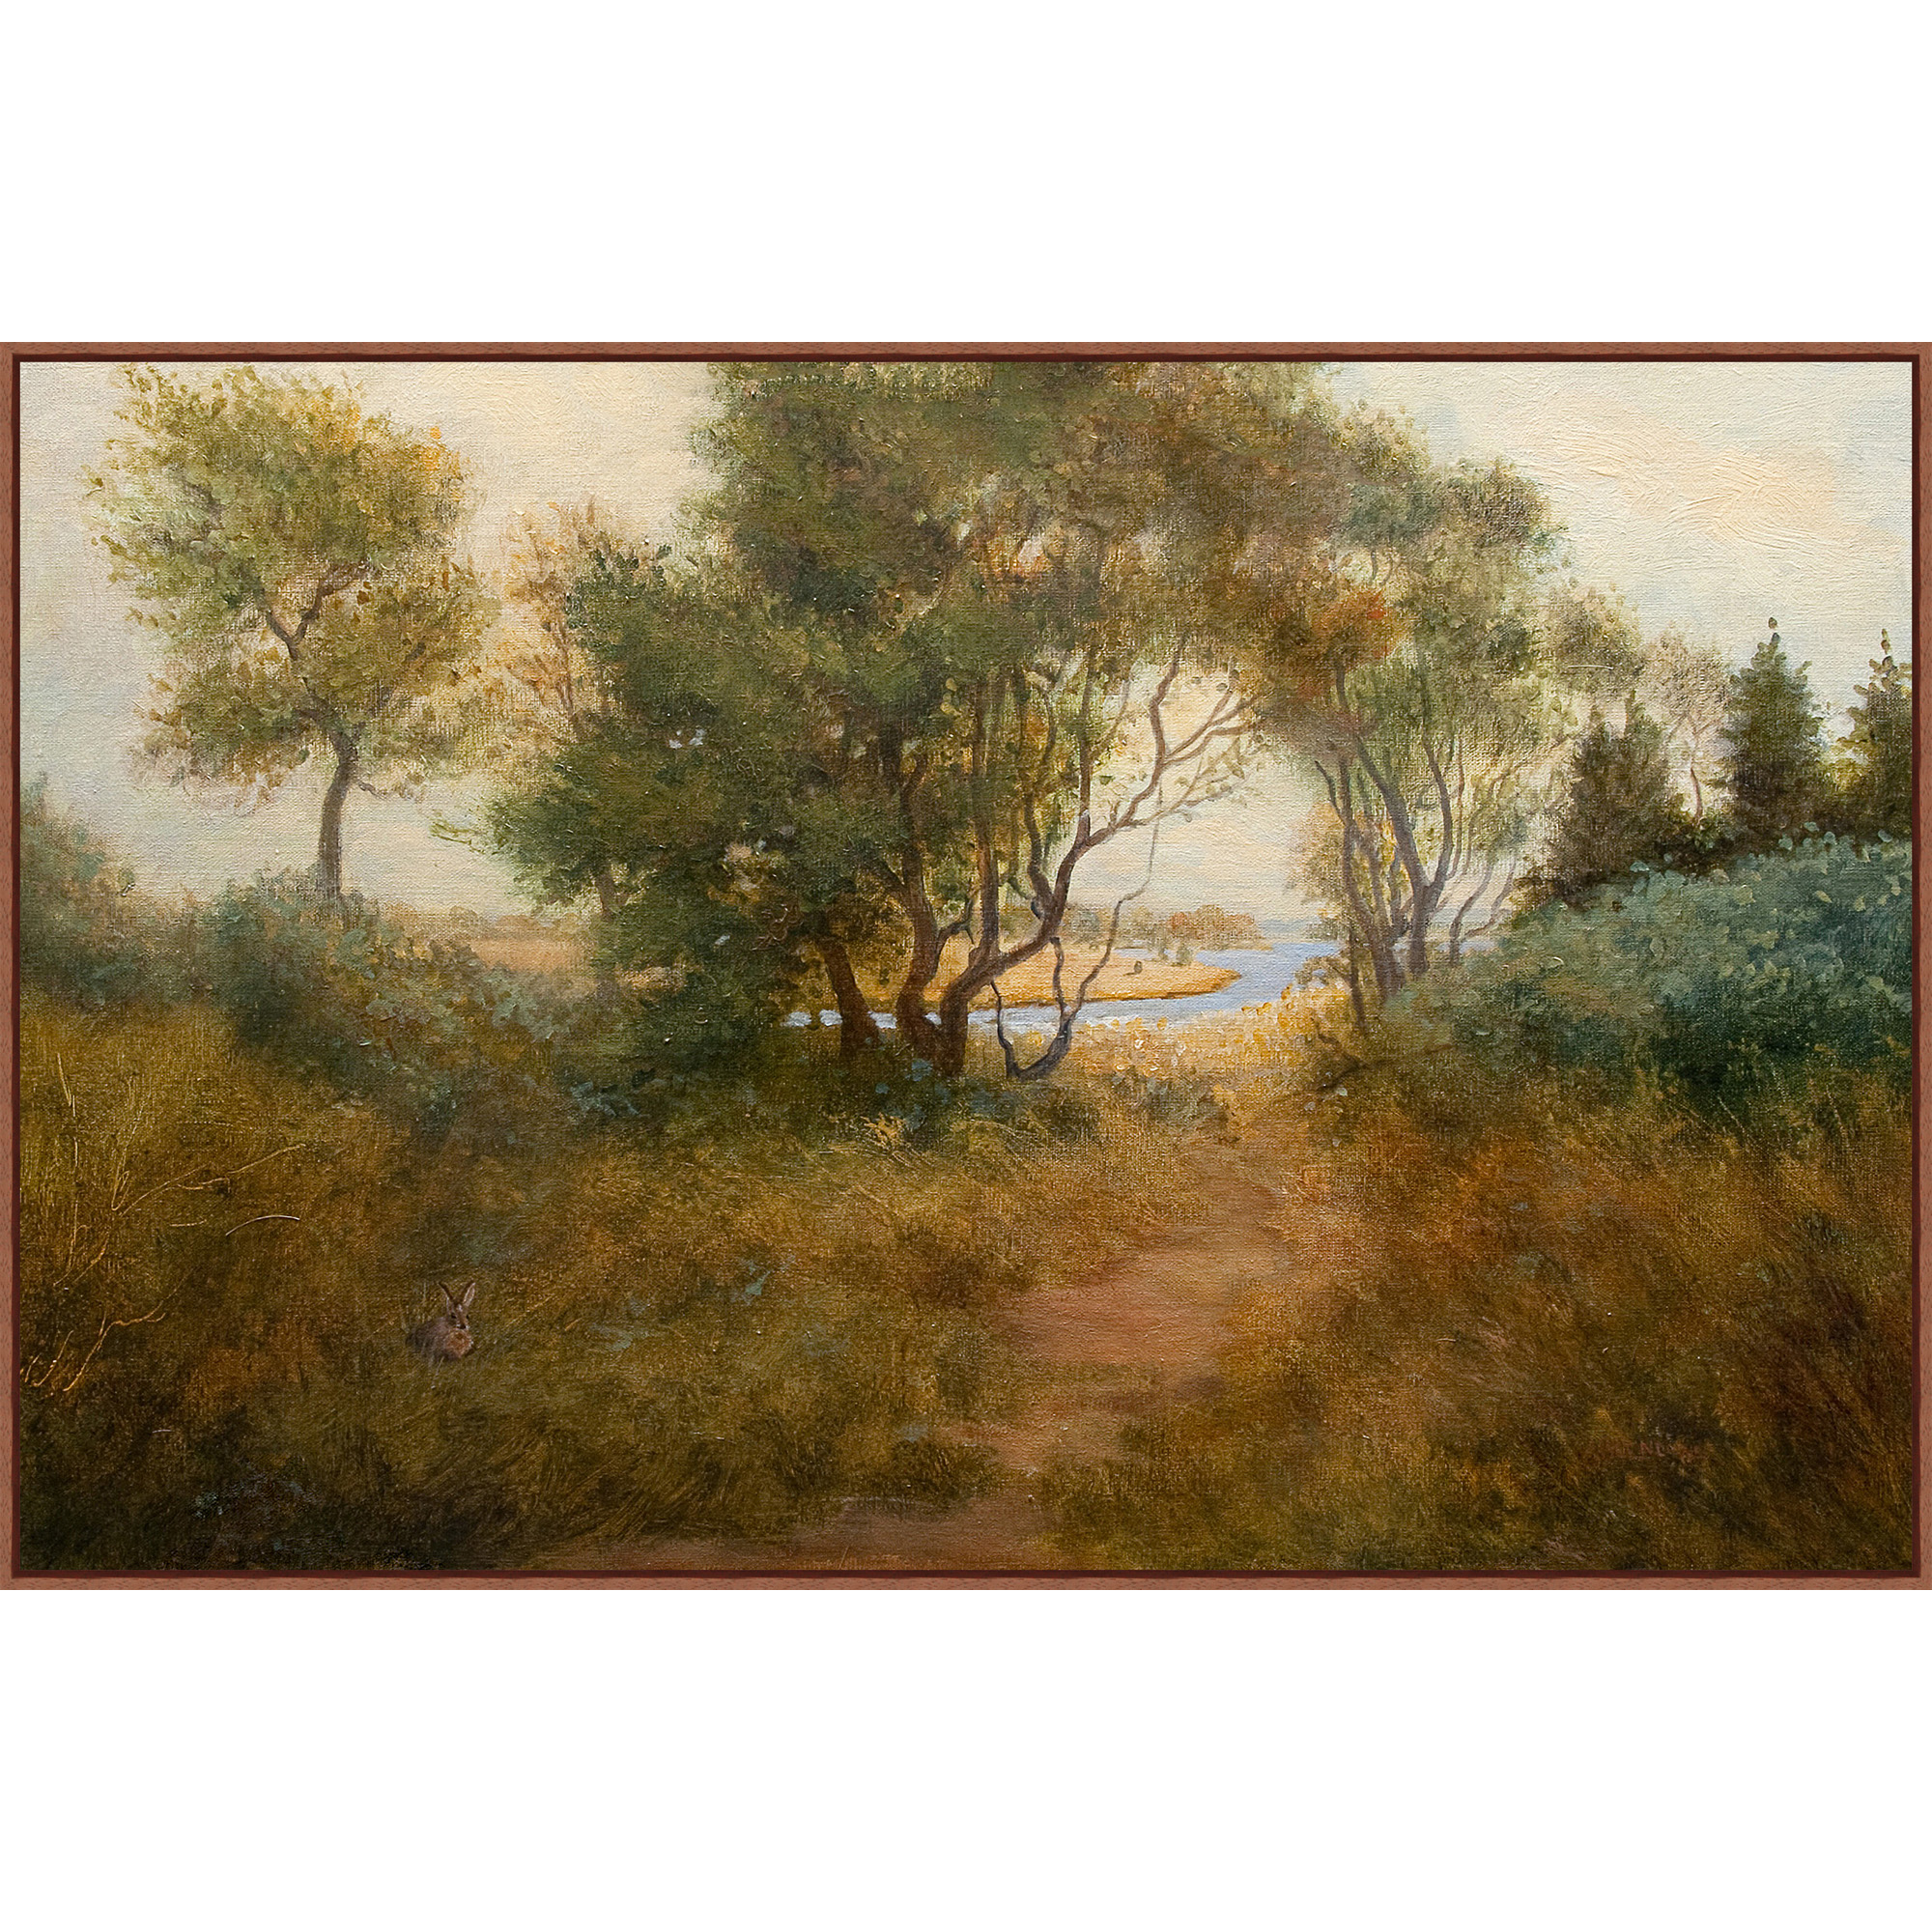 framed wall art called Brush Covered Path shows brush-covered path of autumnal tones leading to an illuminated riverside